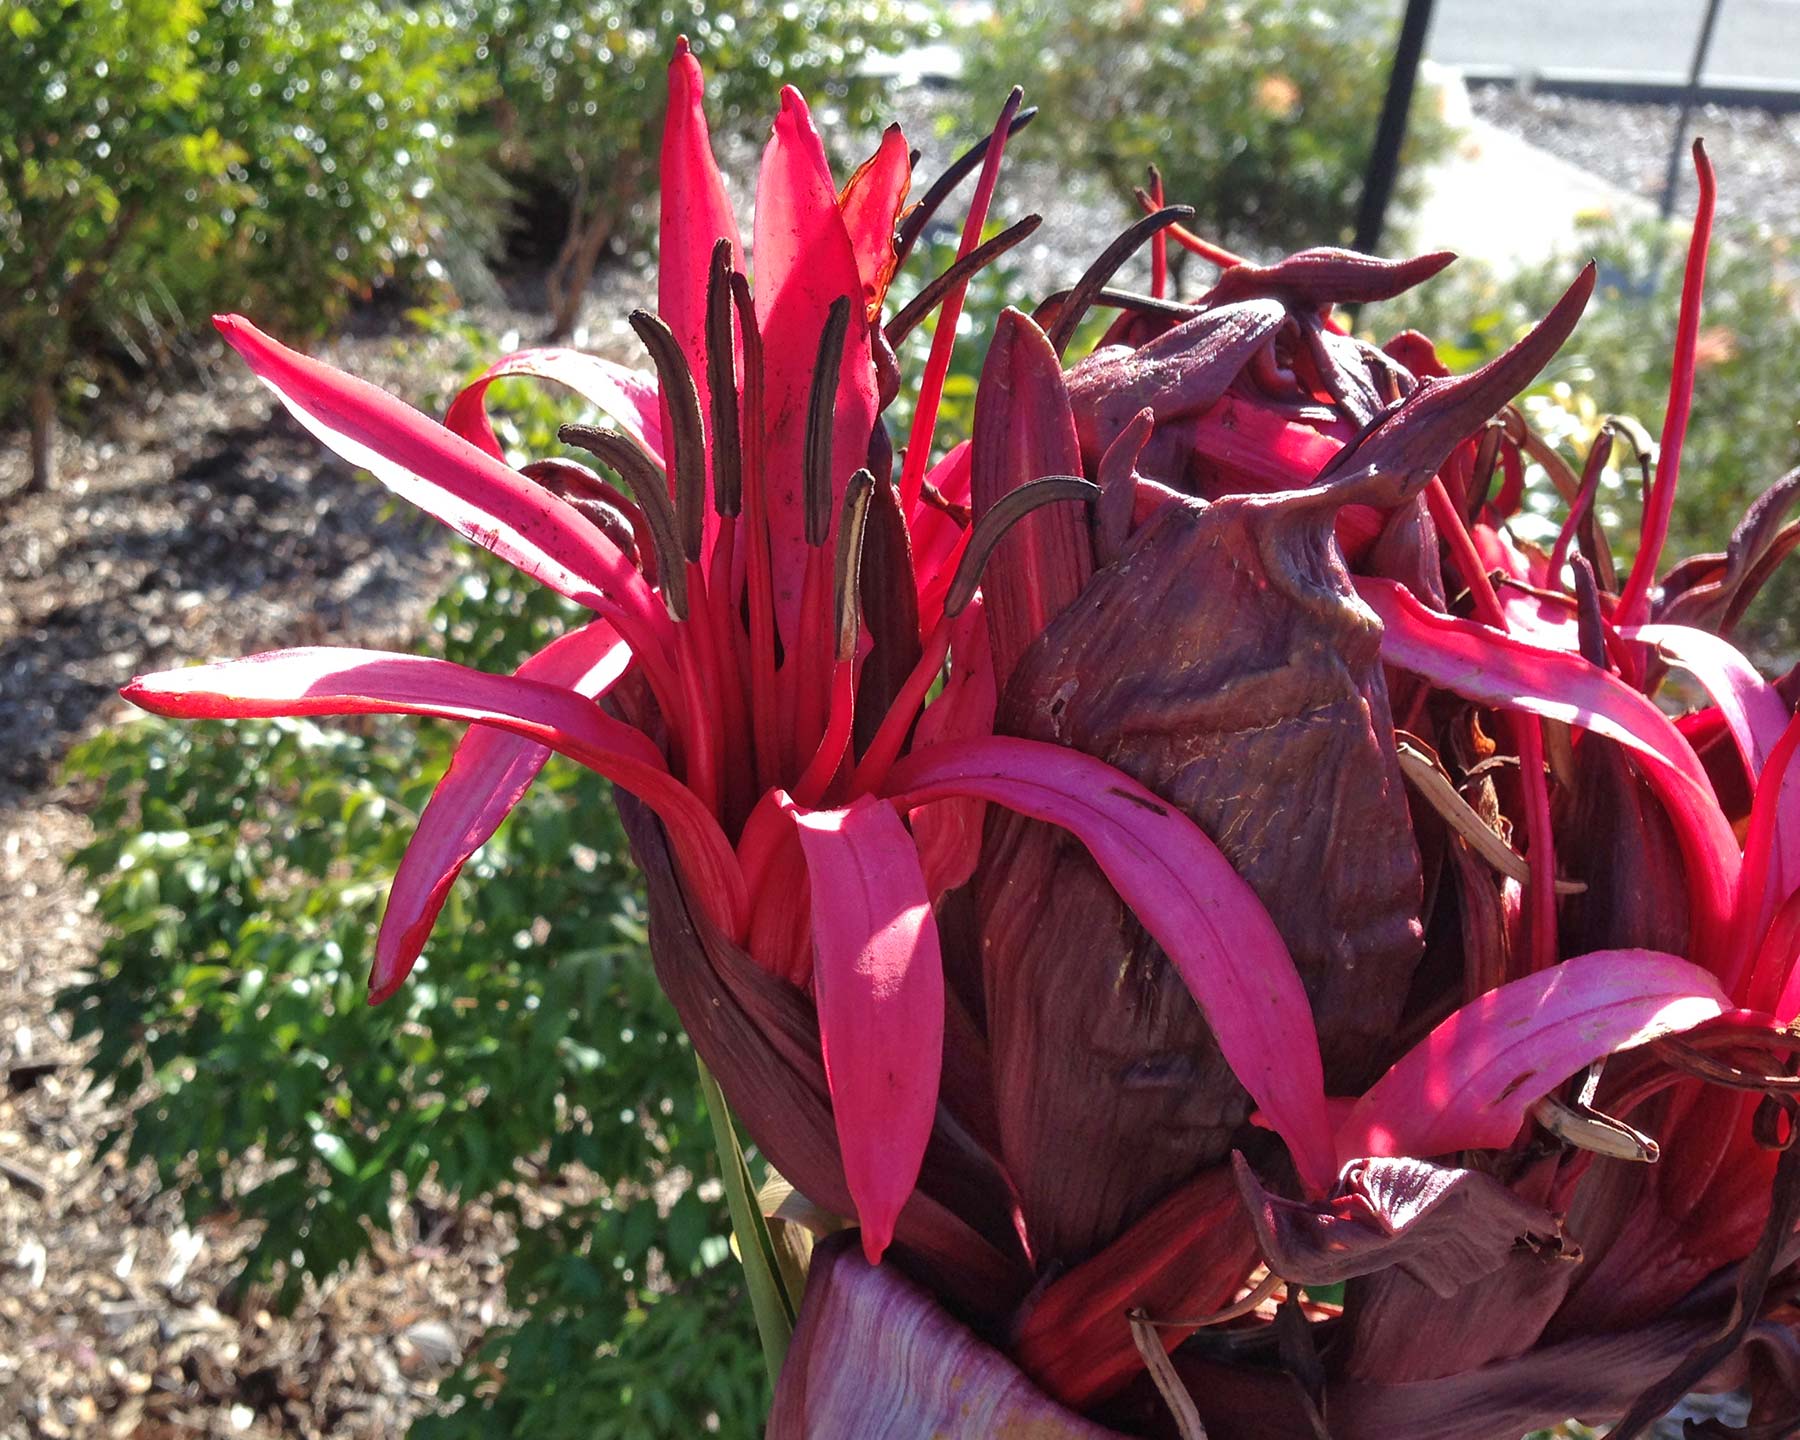 The flower head of the Gymea lily is made up of many bright red lily flowers.